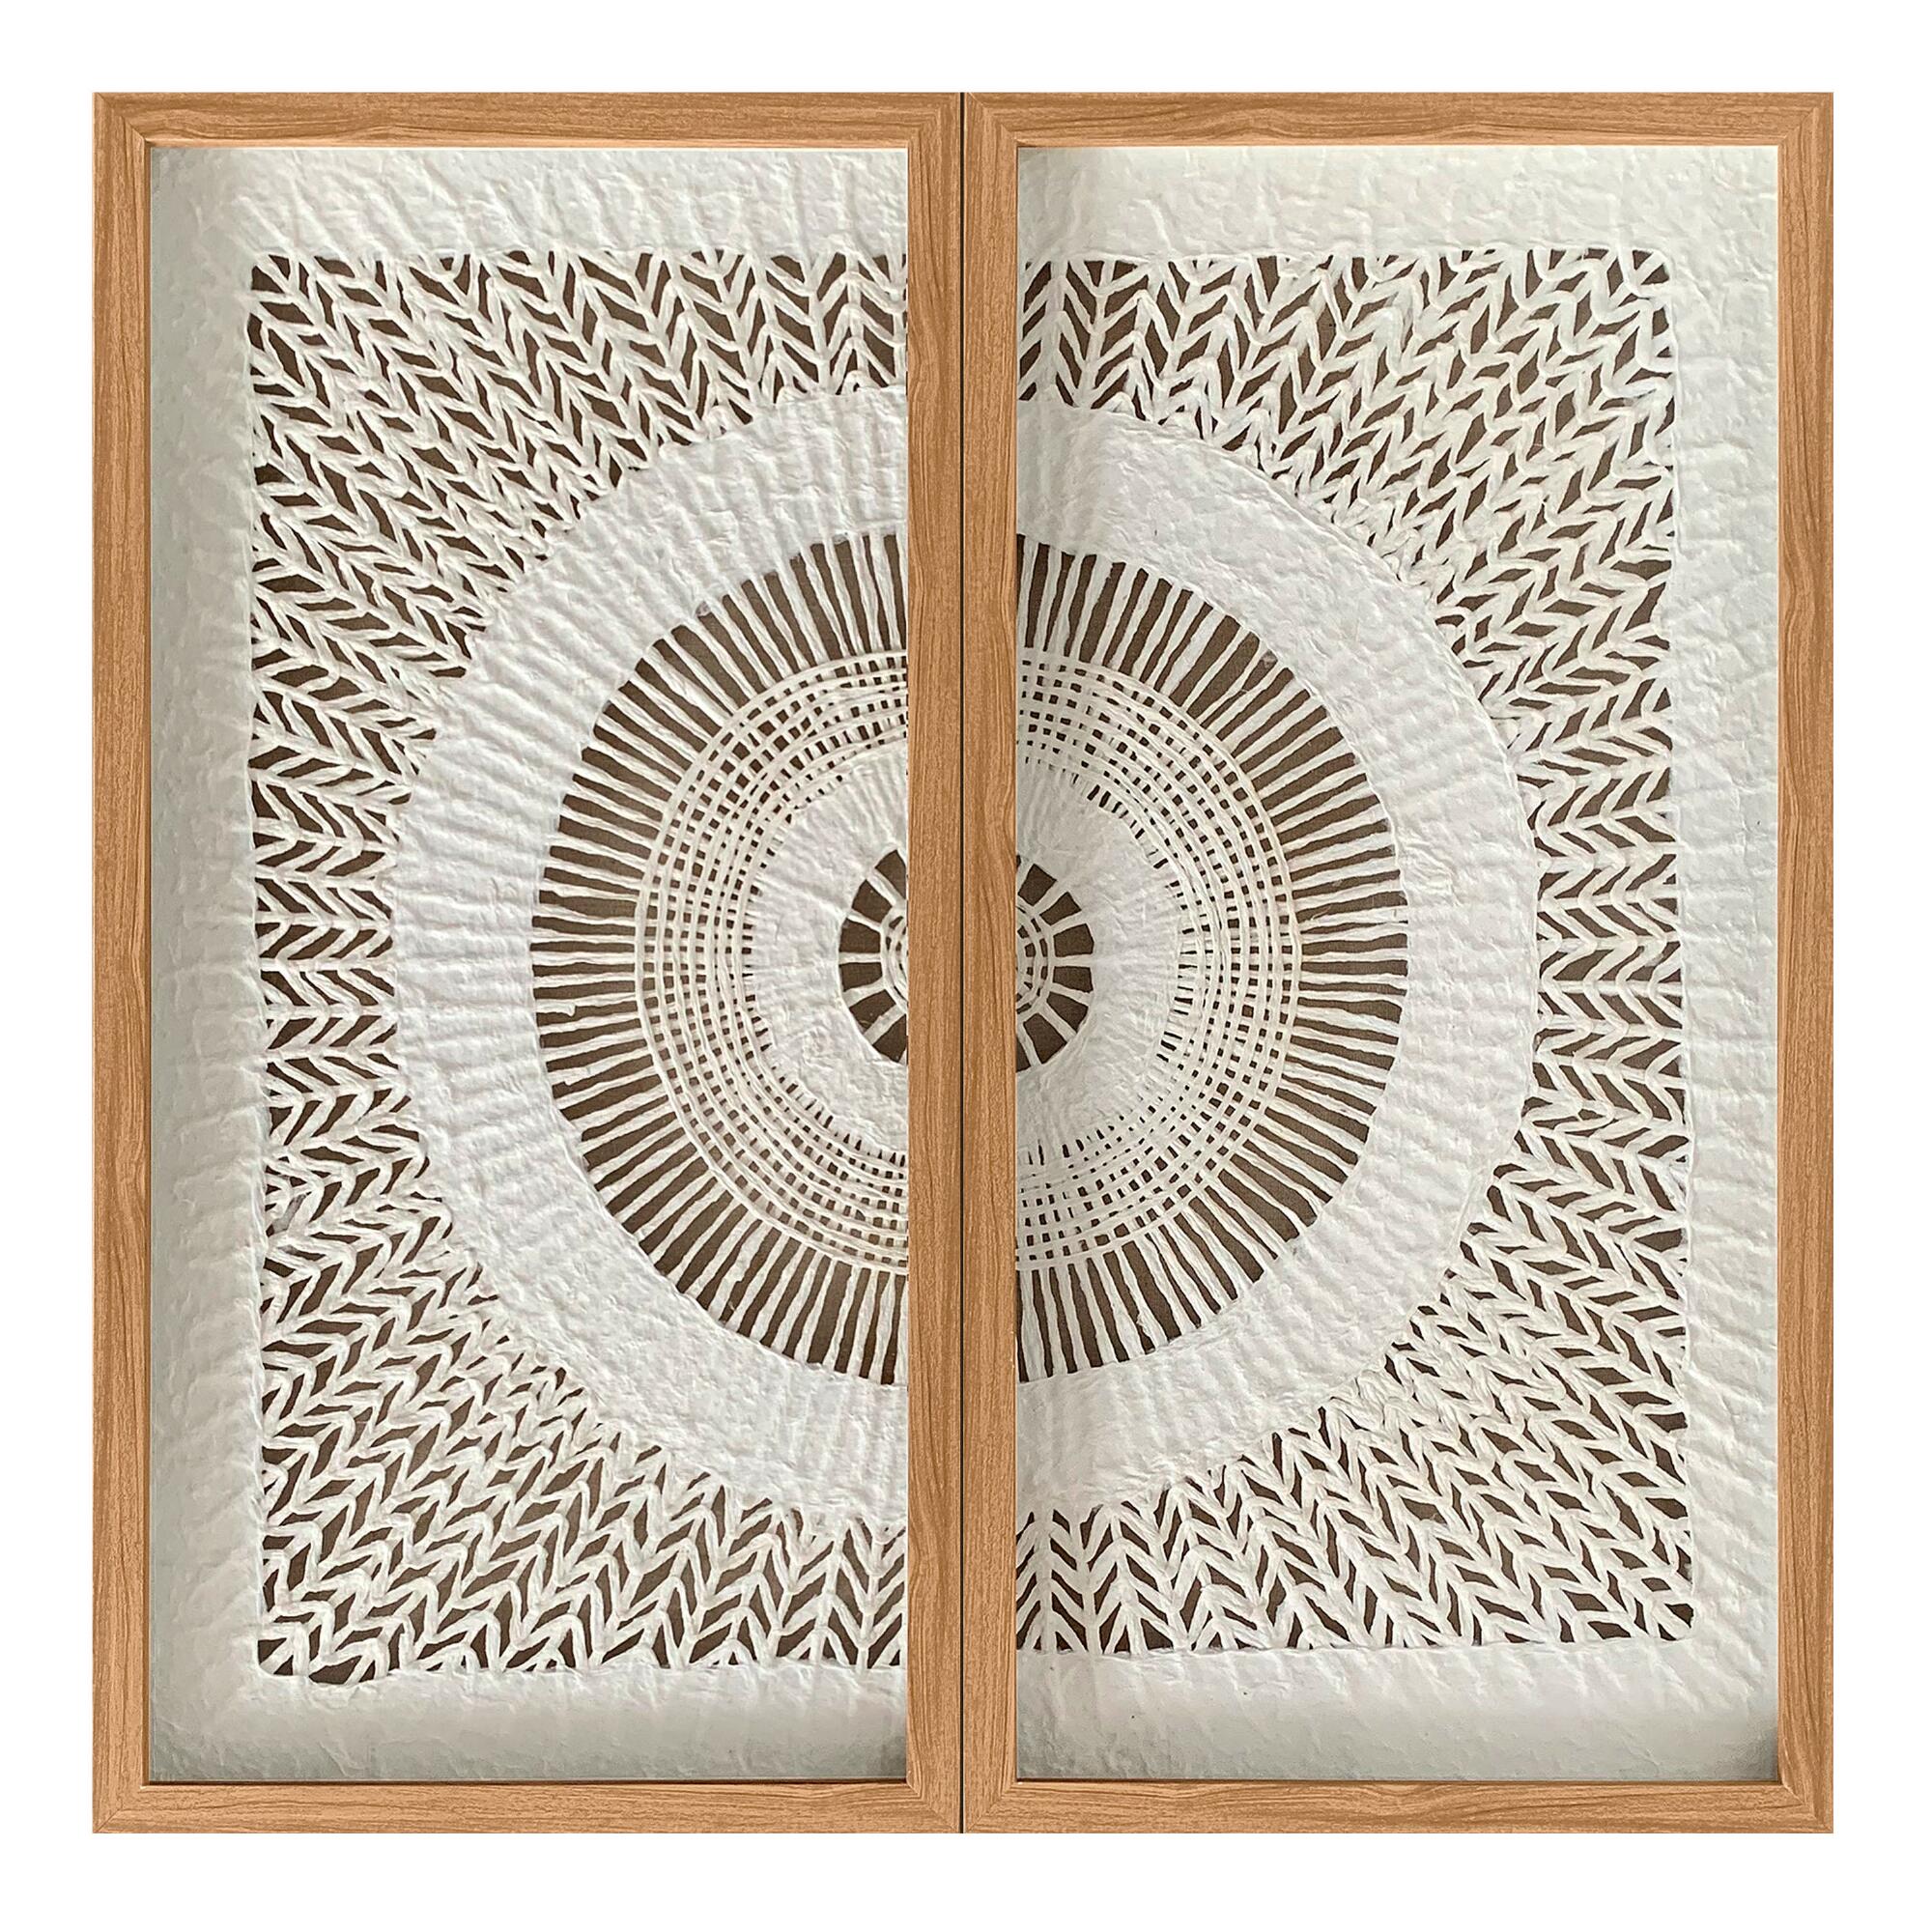 Rice Paper Circle Diptych Shadow Box Wall Art 2 Piece: White/Natural - Medium by World Market